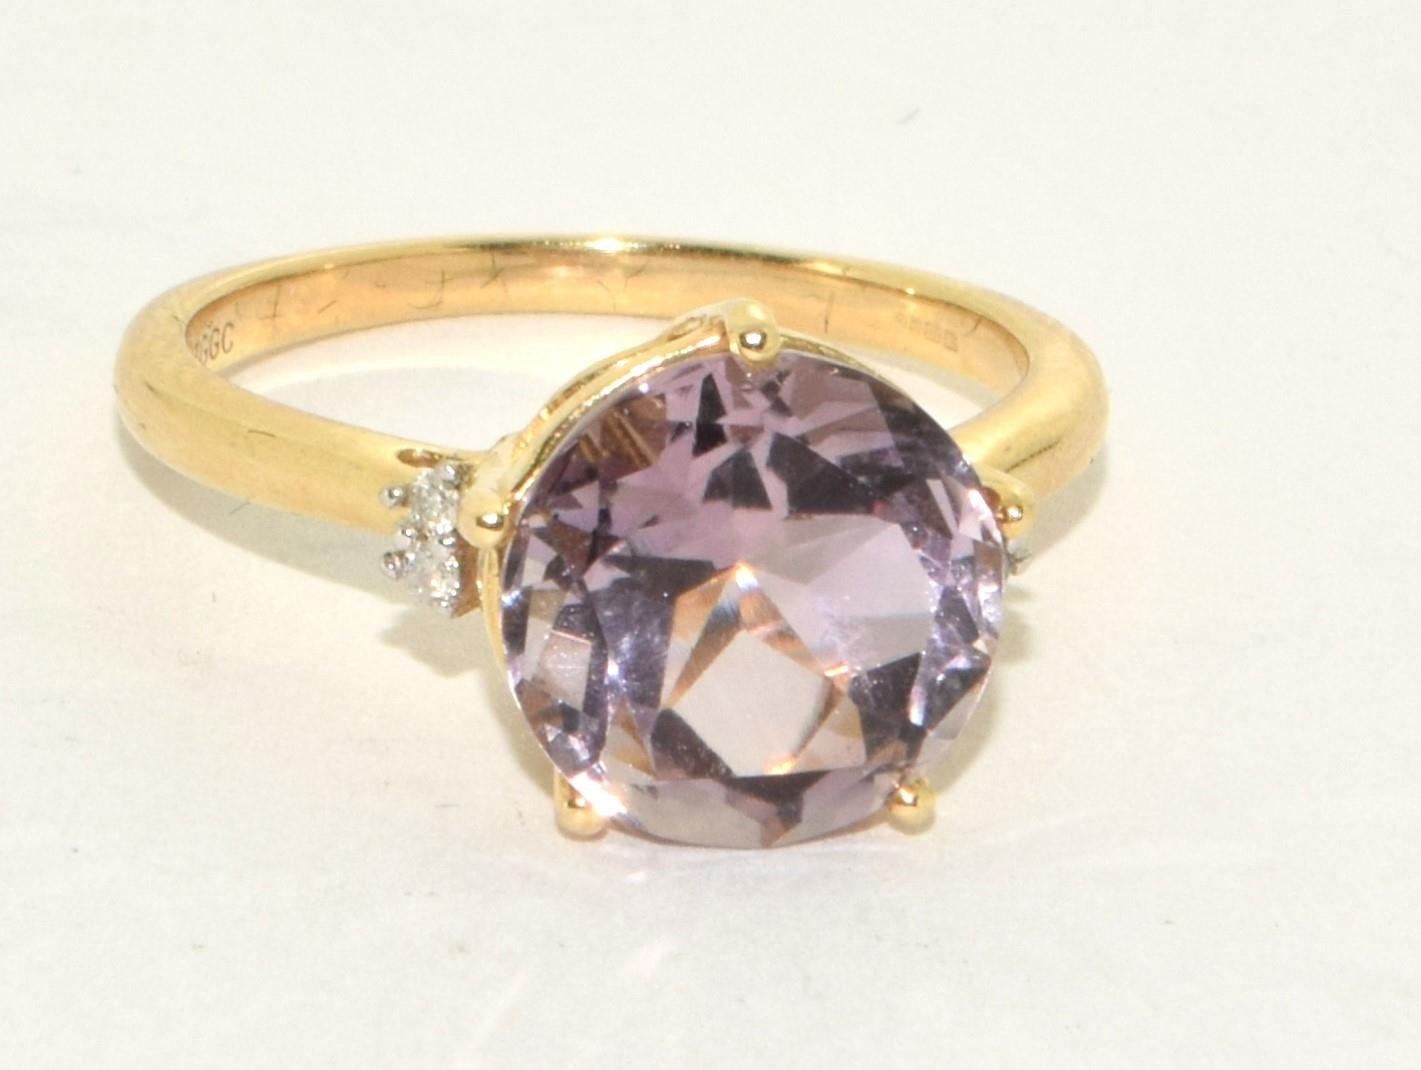 9ct gold ladies Large Amethyst solitaire with of set Diamond ring size N - Image 5 of 5